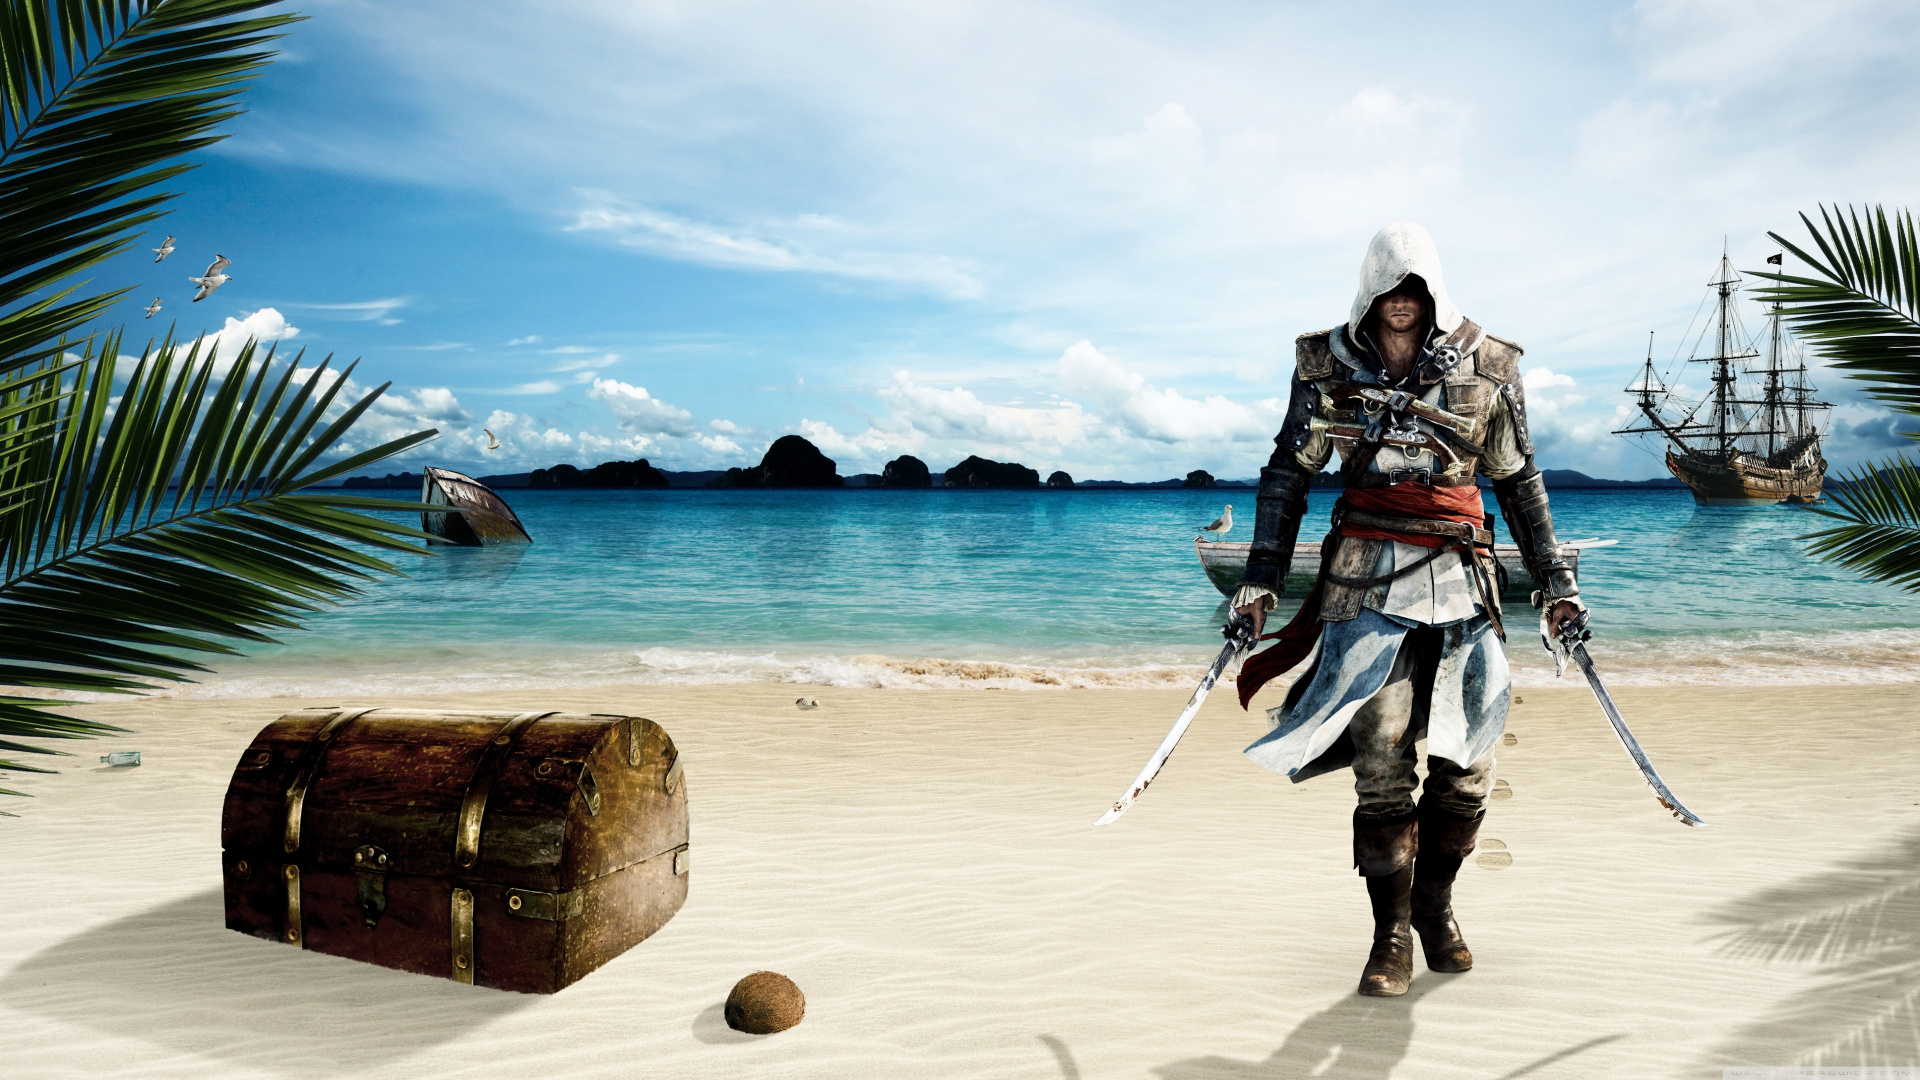 Tourisme, Mer, Vacances, Voyage, Assassins Creed III. Wallpaper in 1920x1080 Resolution